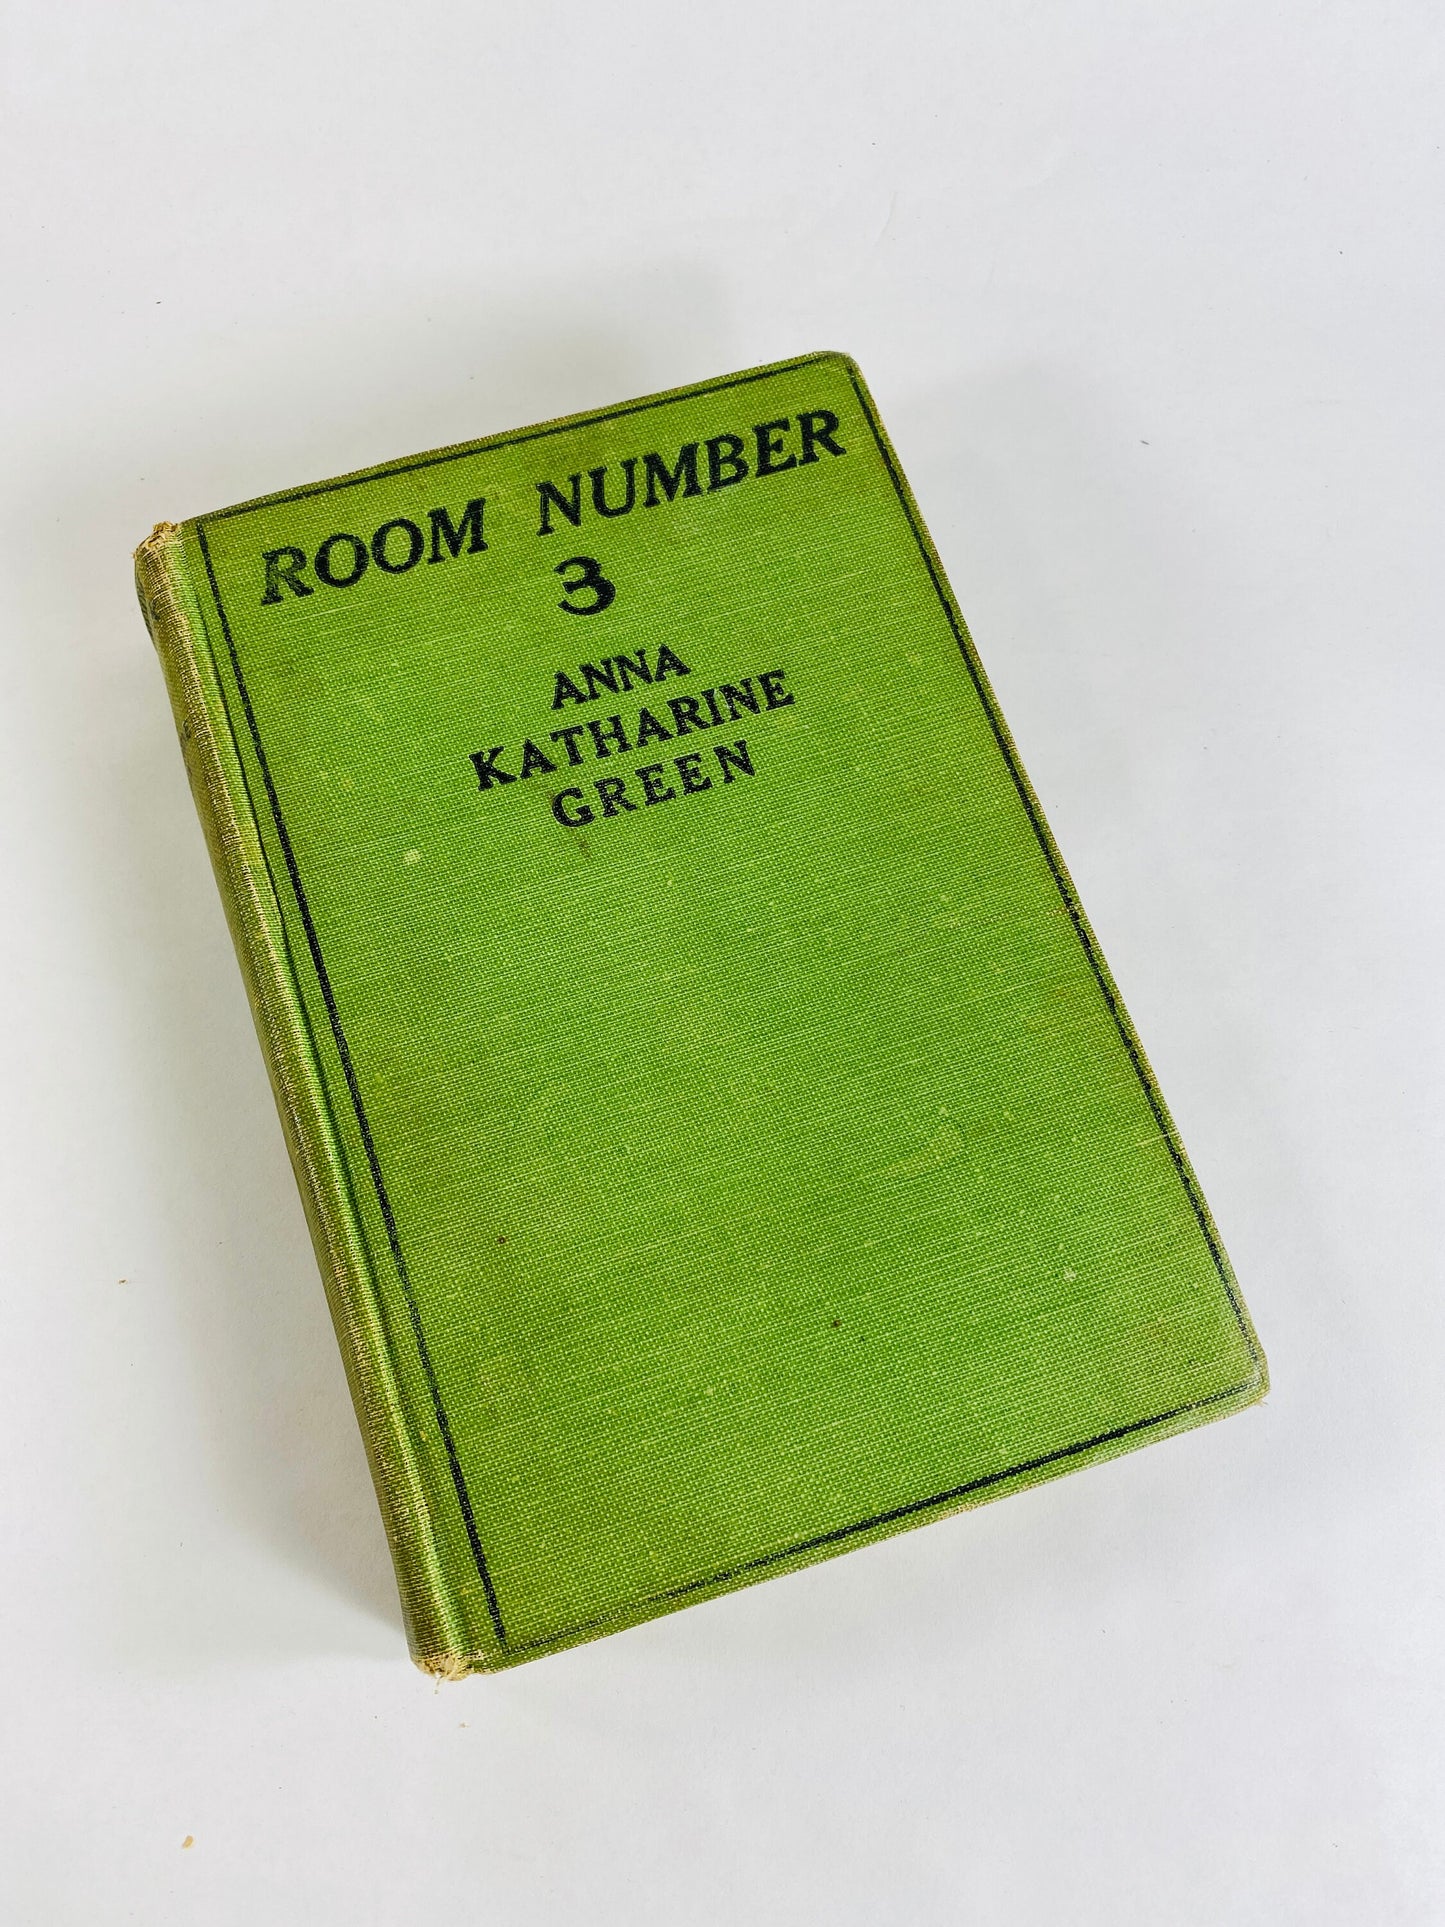 1913 Room Number 3 Anna Katharine Green vintage FIRST EDITION murder mystery book featuring compilation of short stories